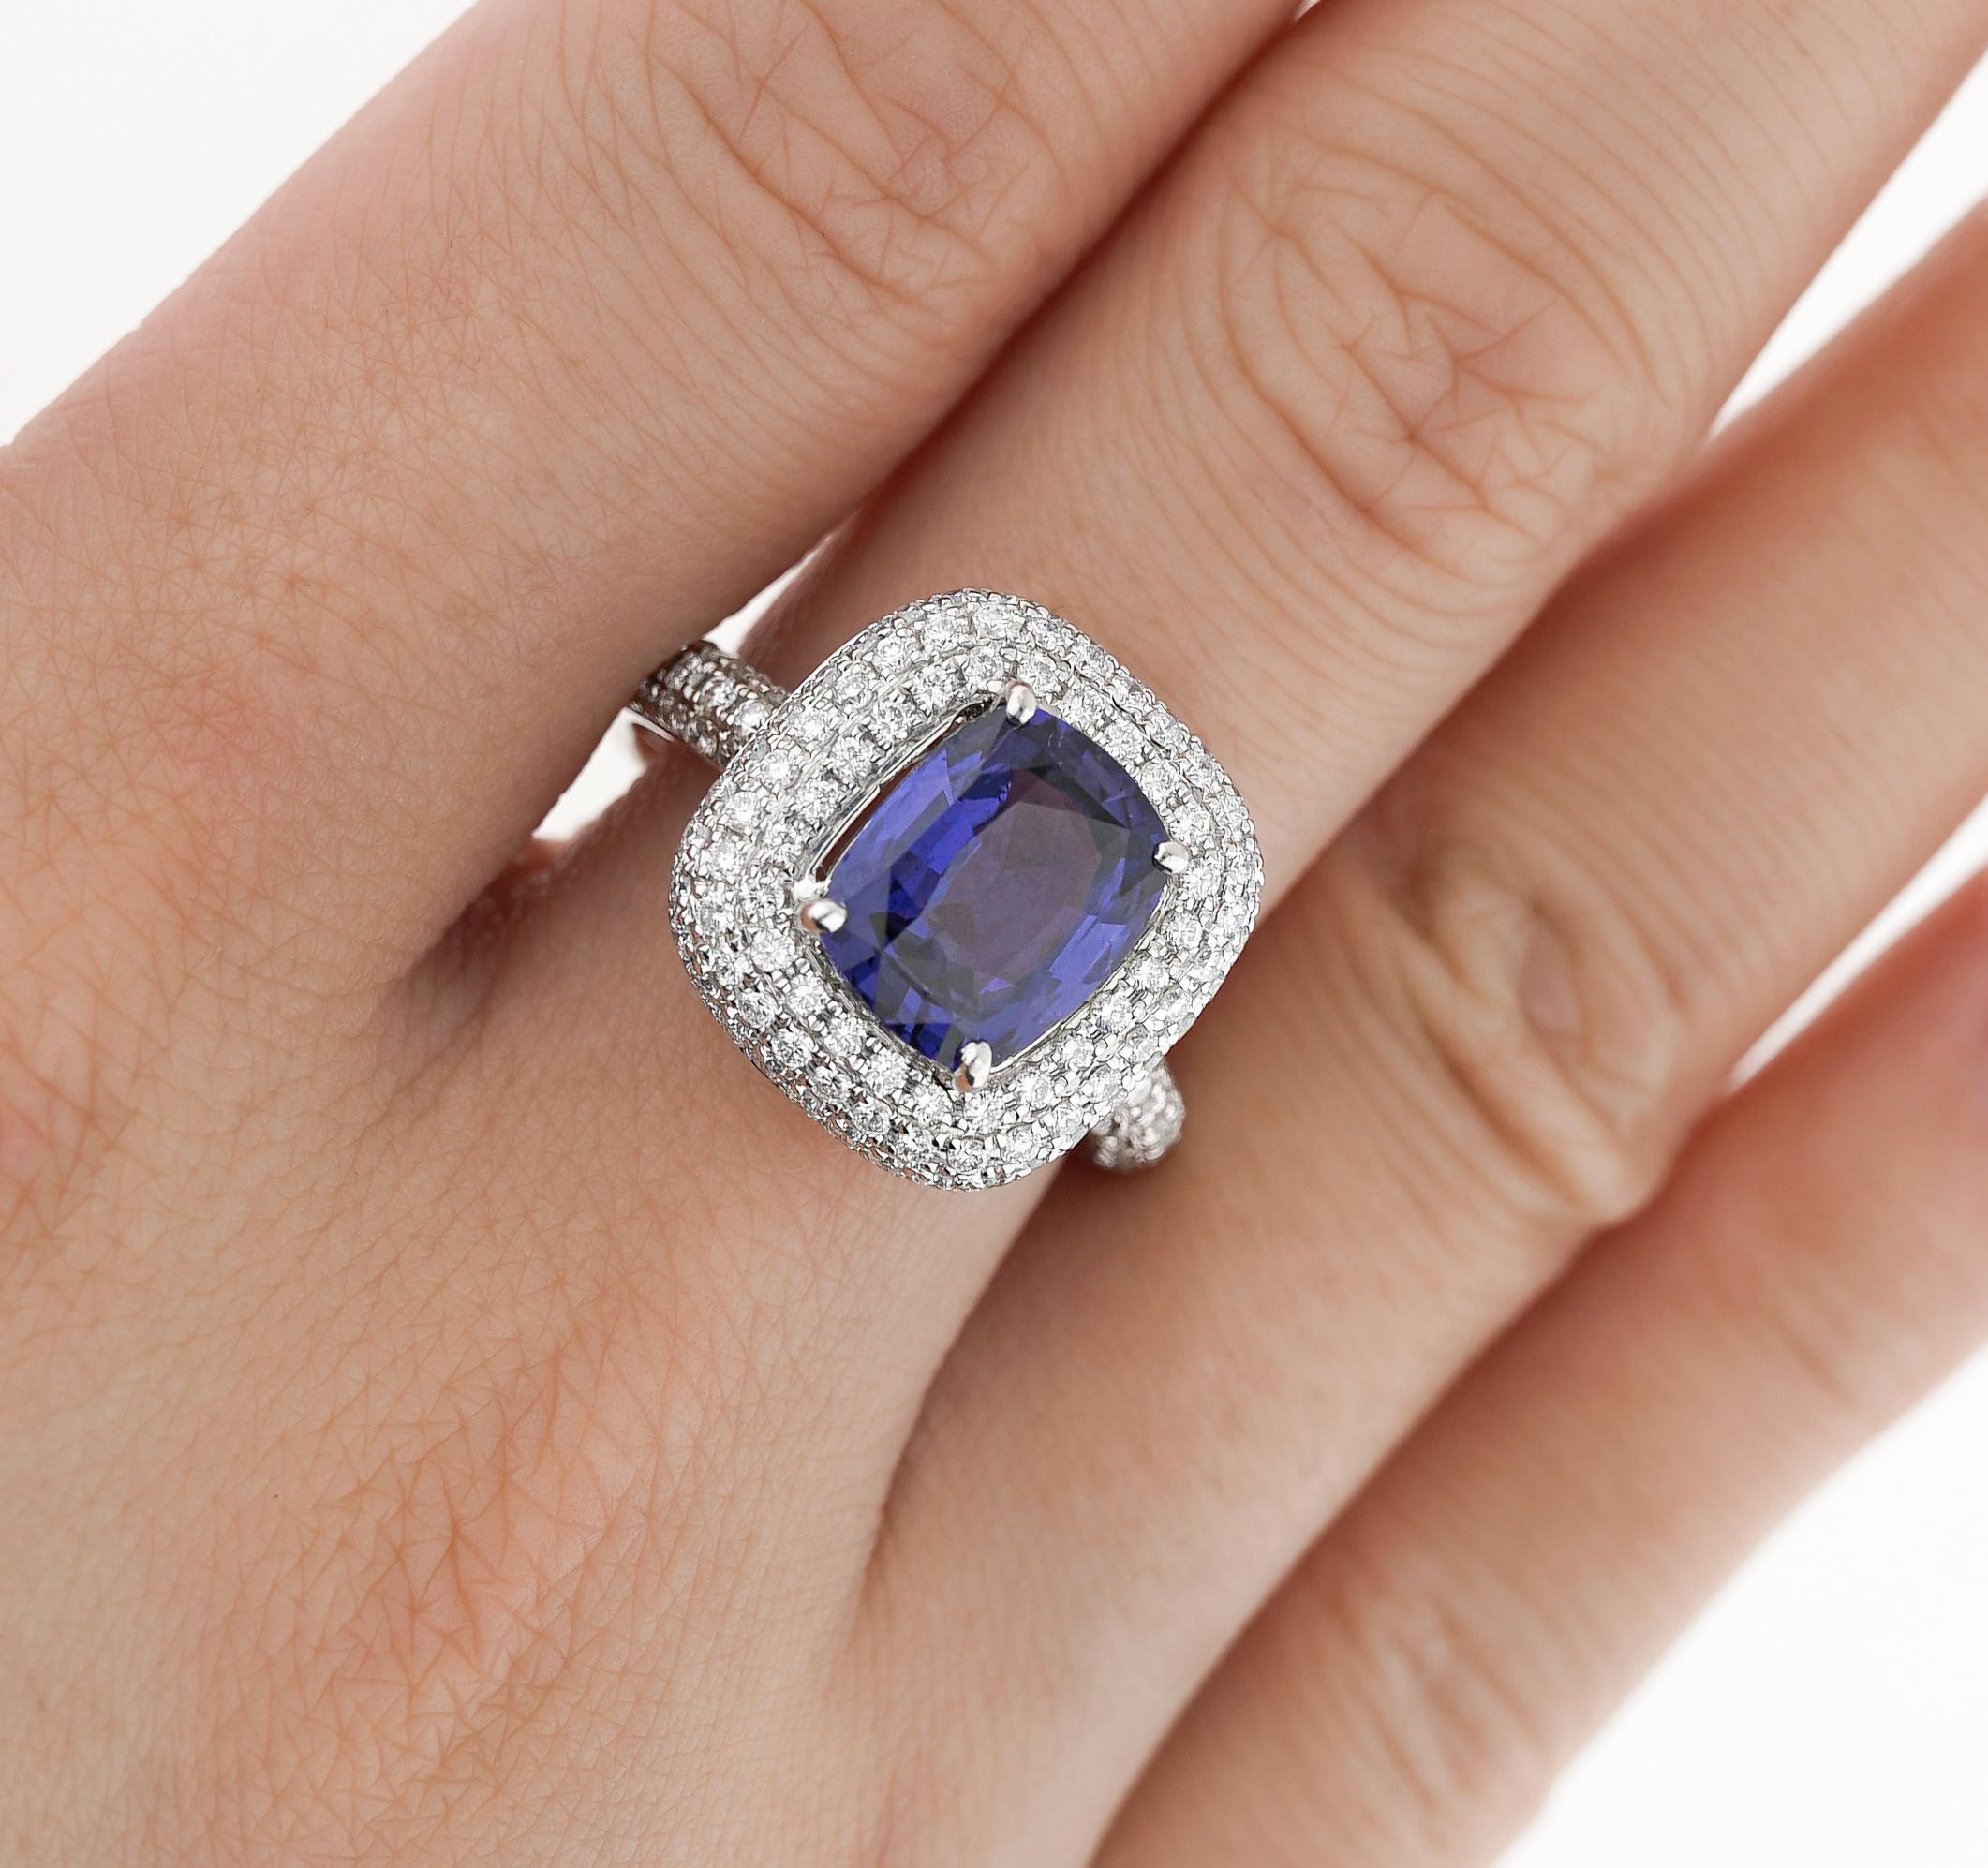 GIA Certified No Heat Color Change 3.25 Carat Violet-Blue Sapphire Ring For Sale 3